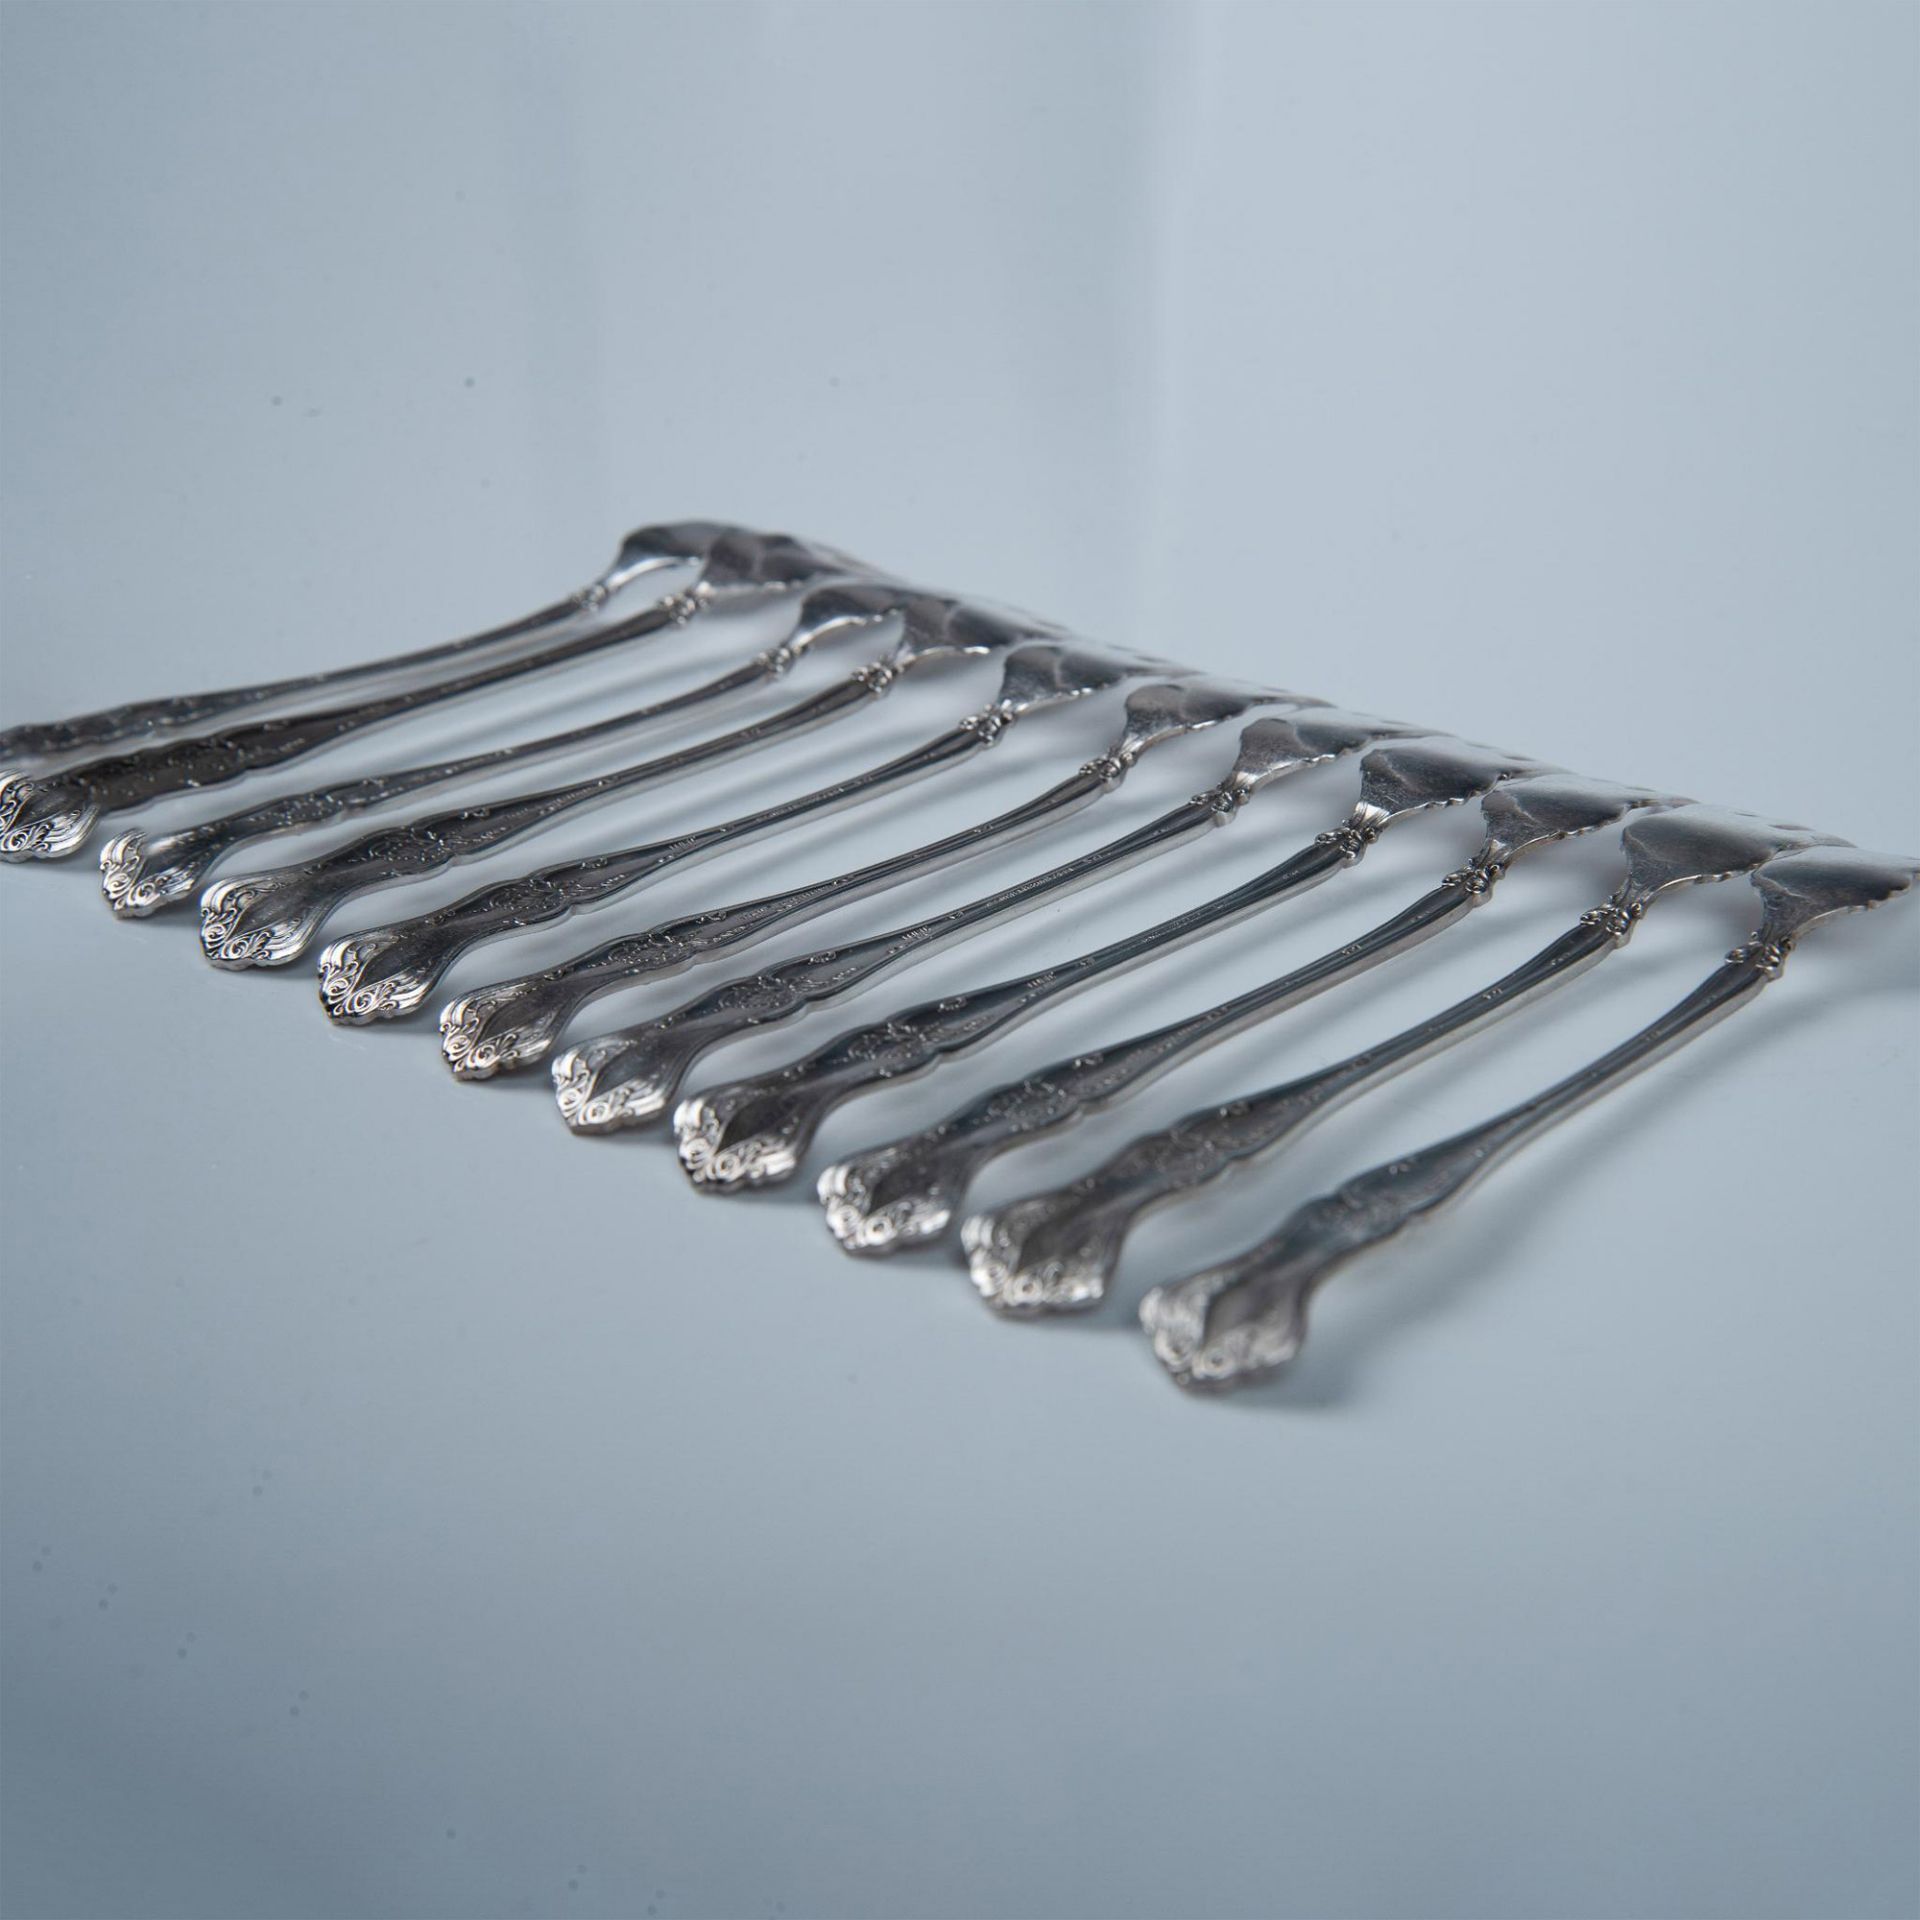 11pc Rogers Bros. 1847 Silverplate Oyster Forks, Vintage - Image 4 of 5